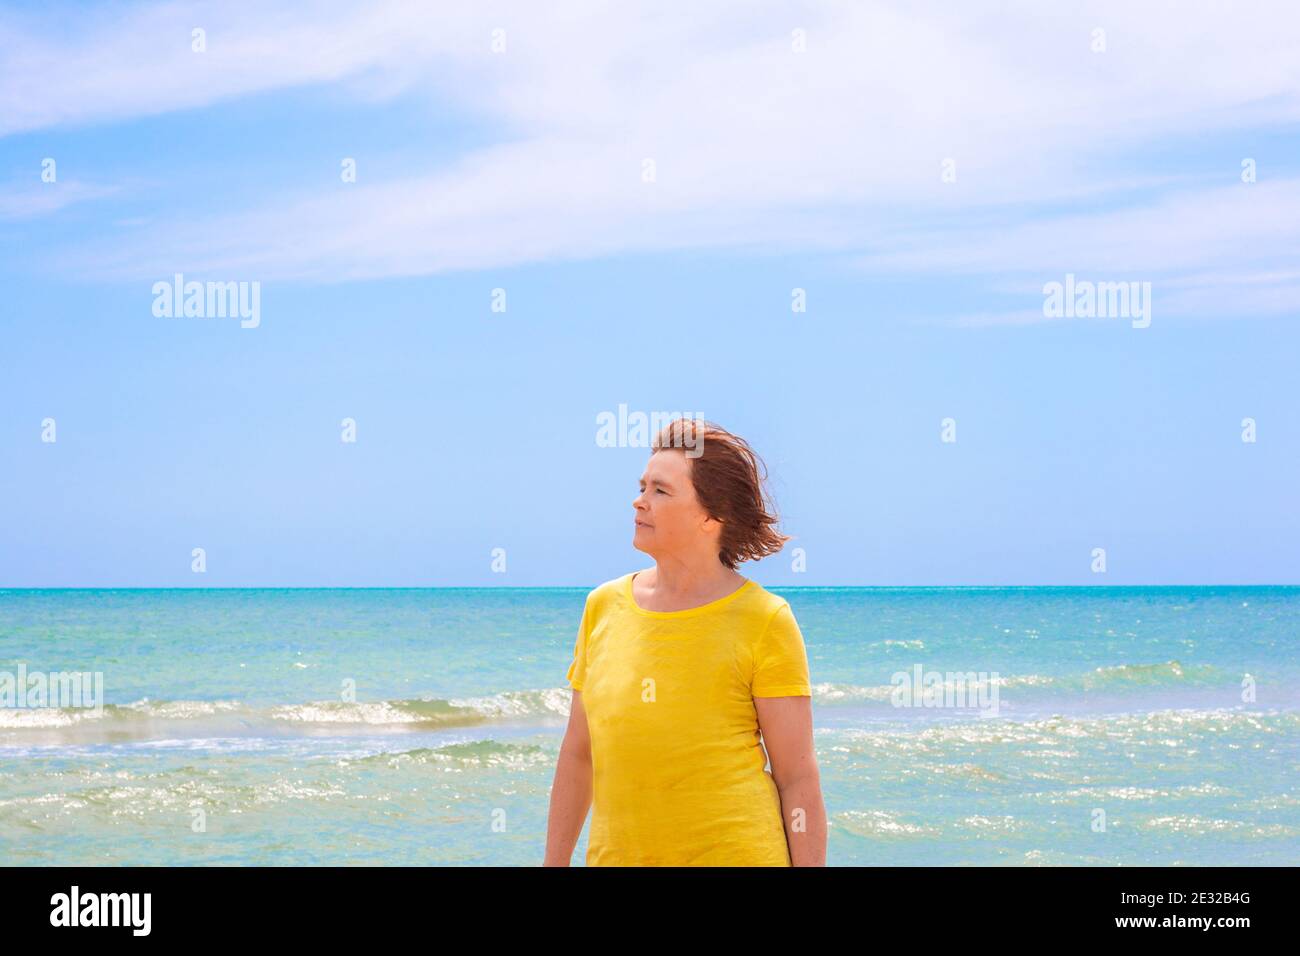 An elderly woman over 65 in a yellow T-shirt, stands on the shore of the azure sea against a blue sky, looks to the left and enjoys a summer day, the Stock Photo